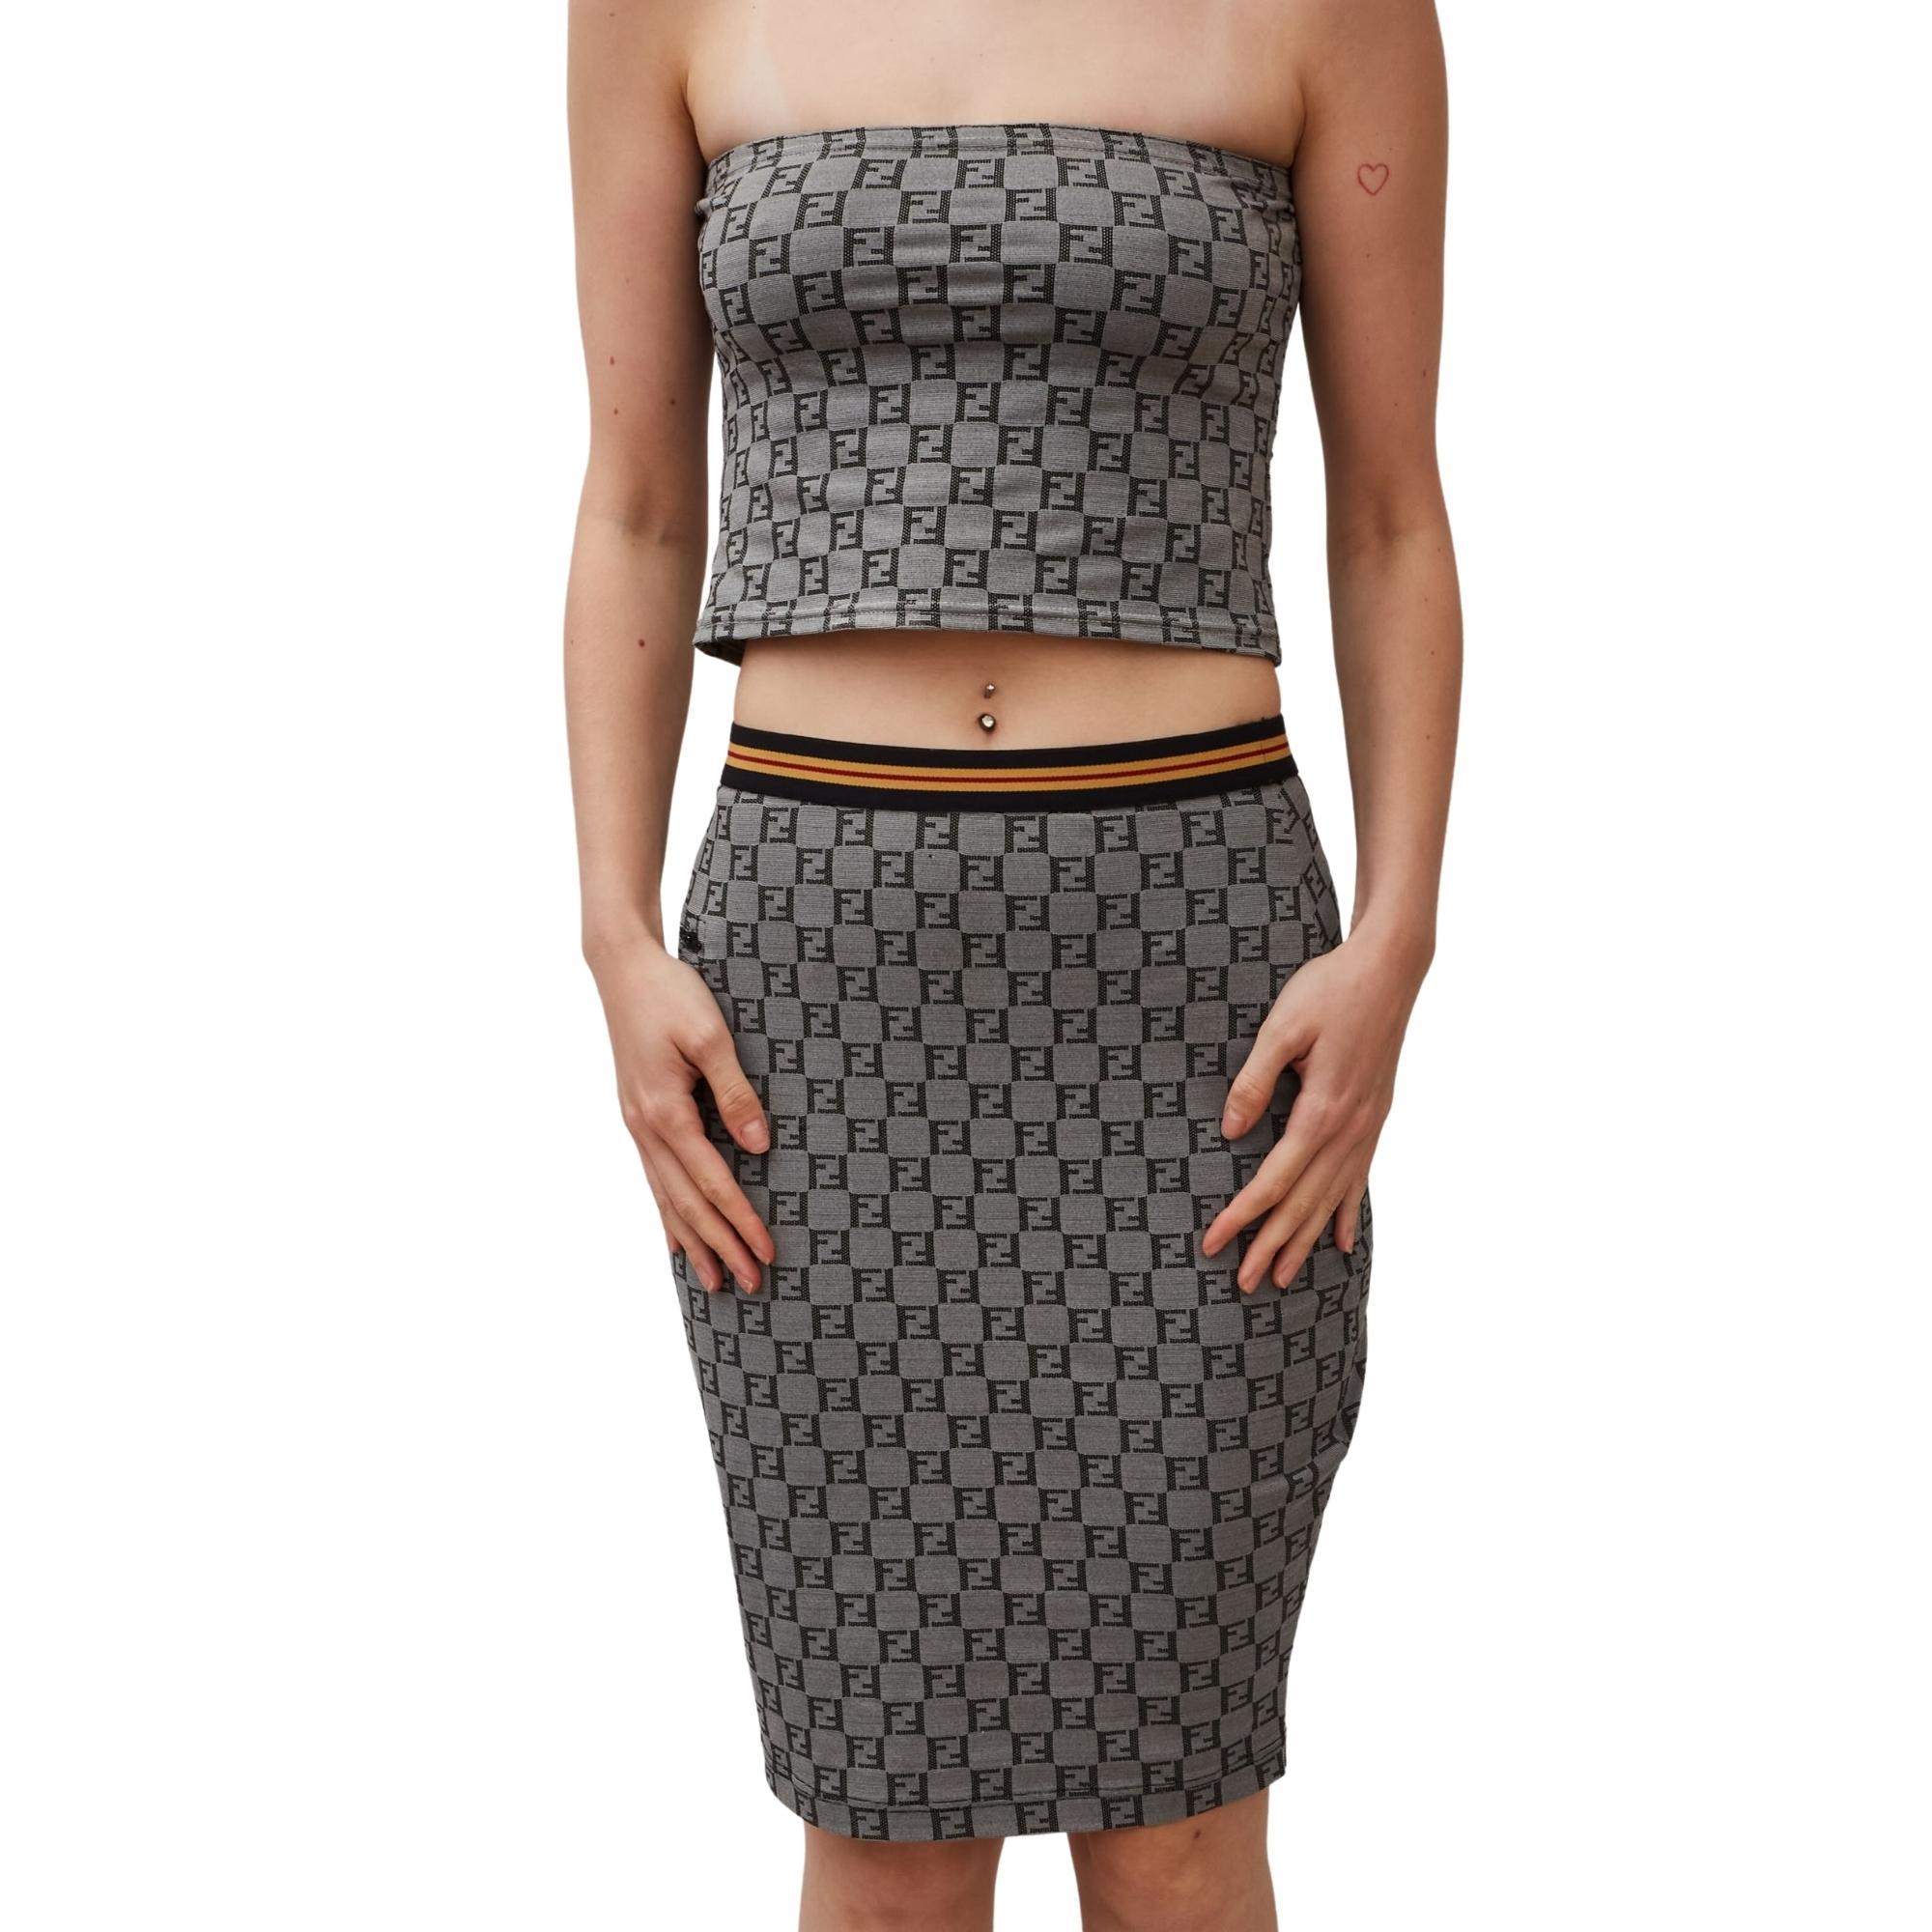 Fendi repurposed 2 piece set. Item was a dress, but was tailored to make a two piece. Fabric feels stretchy.

COLOR: Grey
MATERIAL: Not listed, feels like synthetic blend.

SIZE: Medium

MEASURES
SKIRT
Waist: 30”
Length: 20”
TOP
Bust: